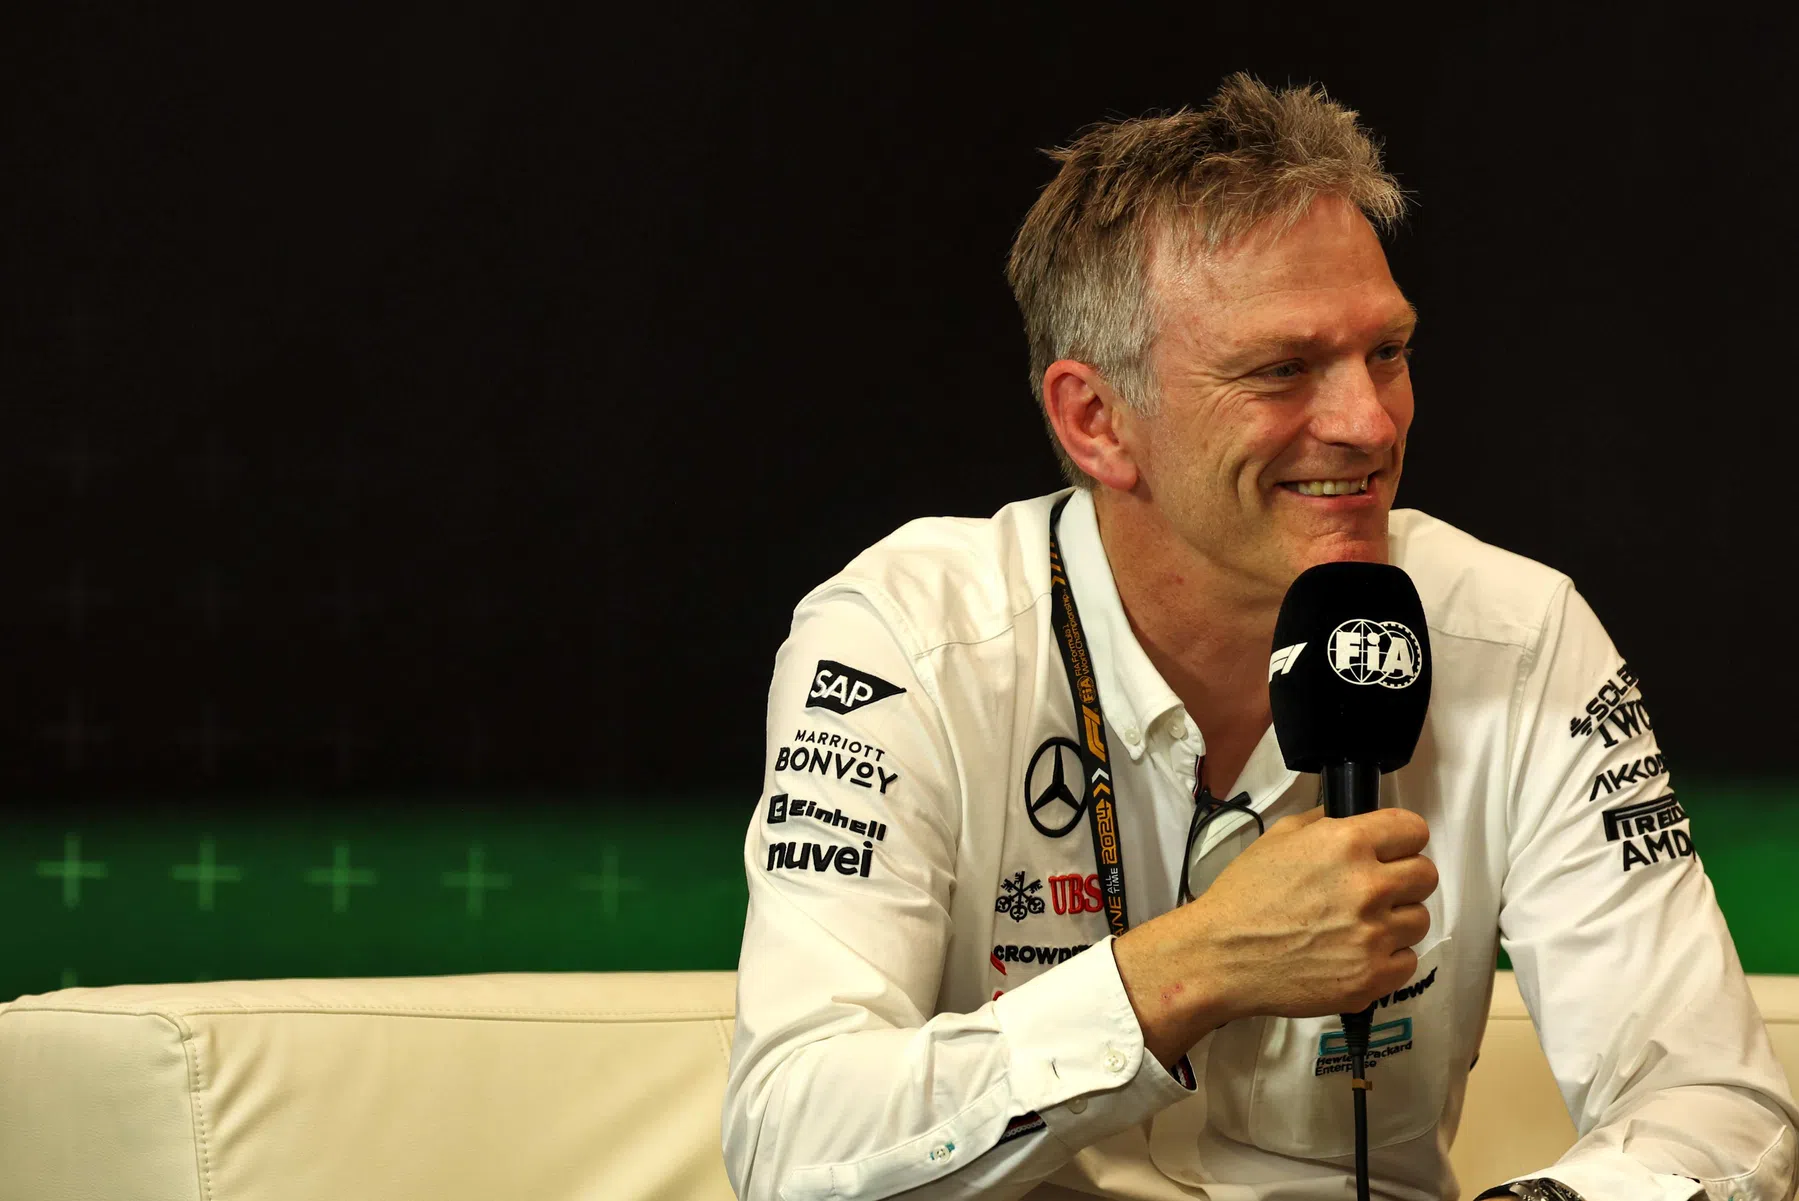 James Allison is not worried about Mercedes' future prospects